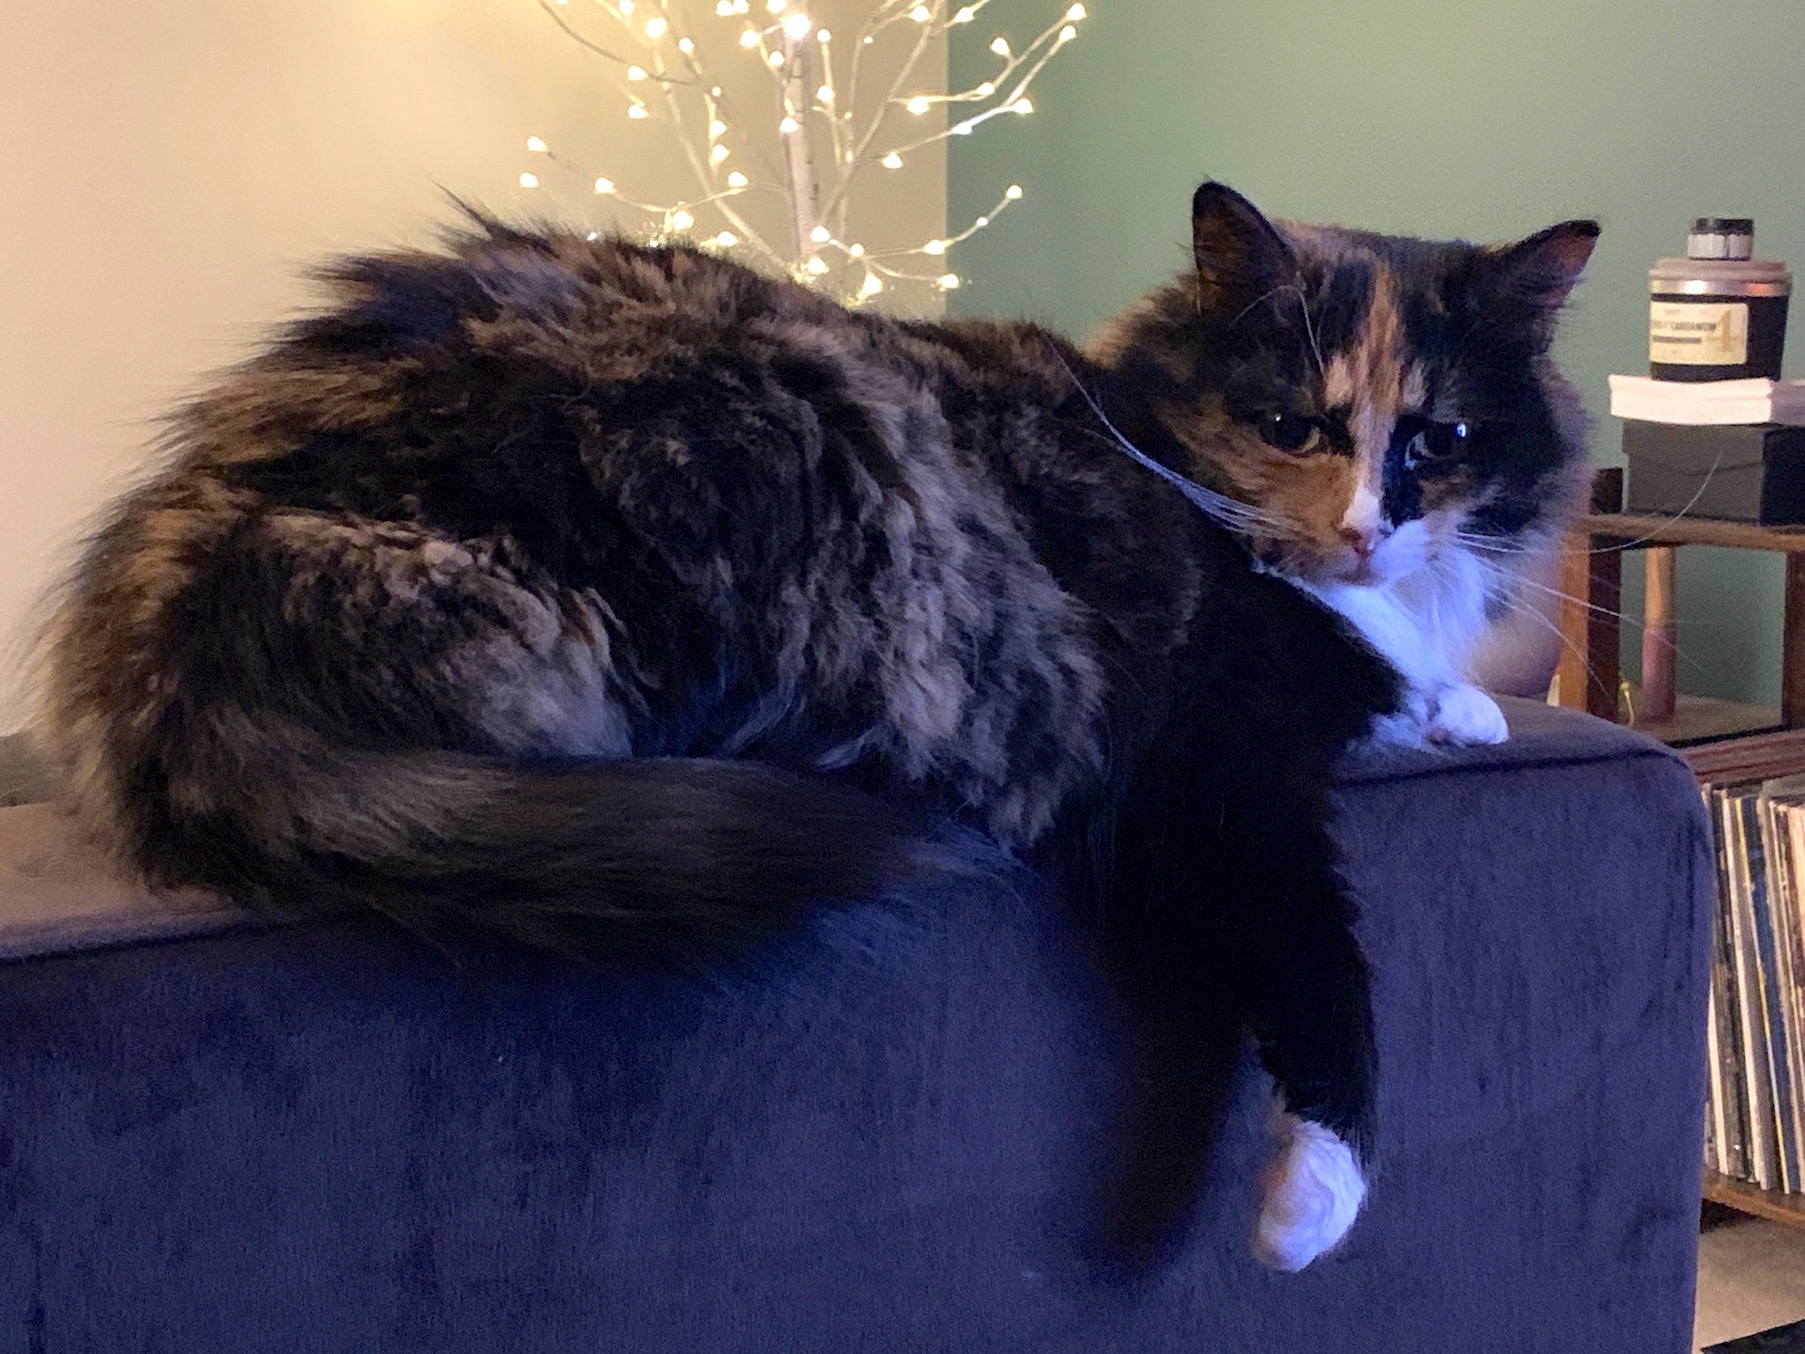 https://www.askamanager.org/wp-content/uploads/2020/10/Olive-on-couch.jpeg